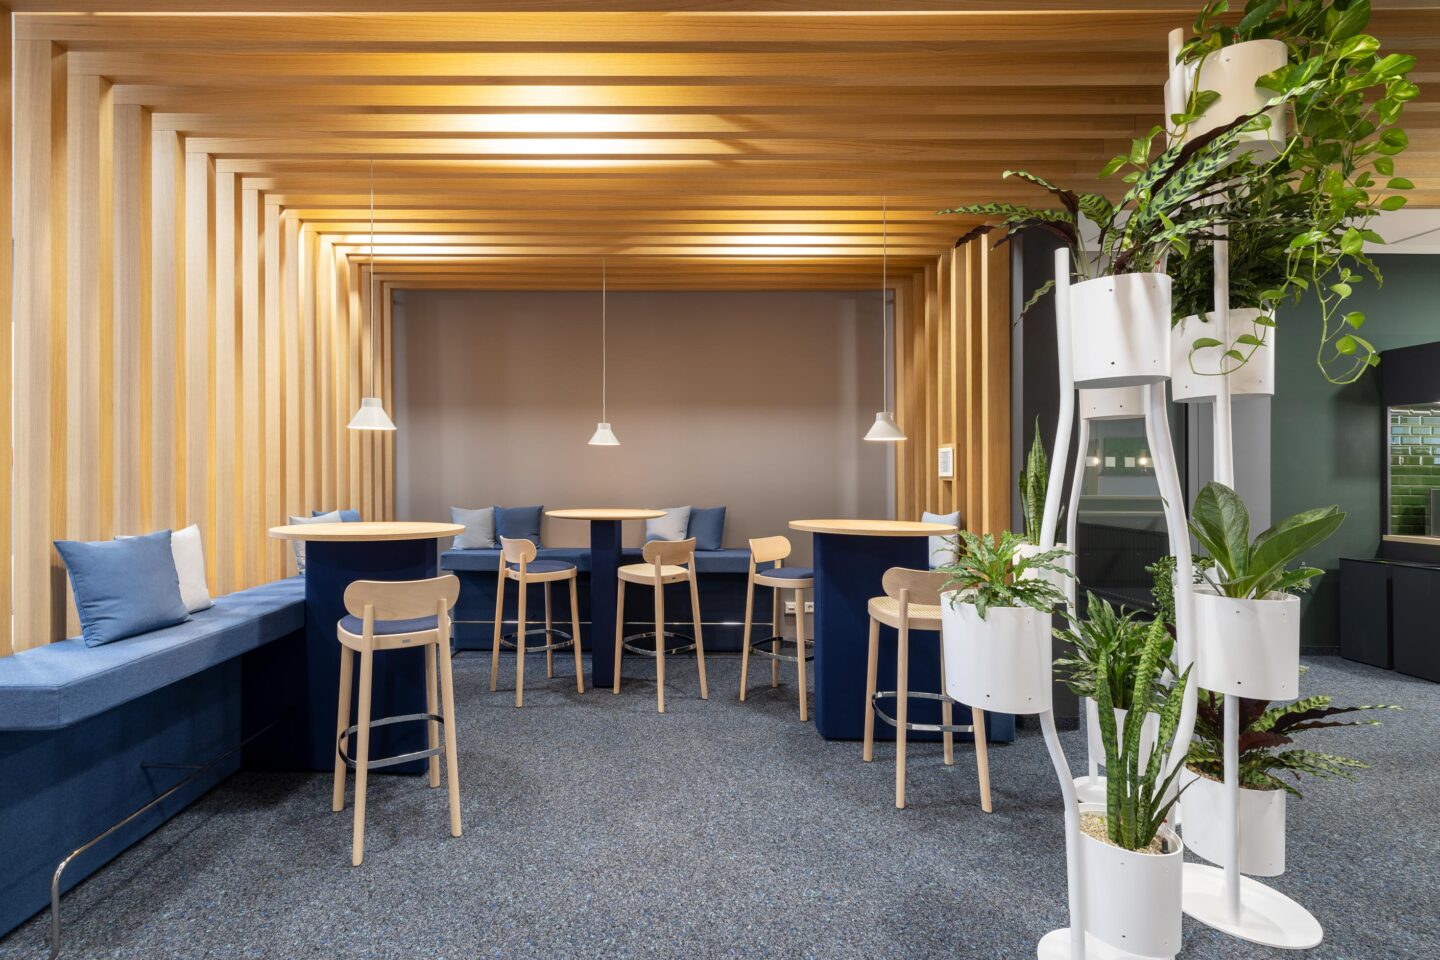 Workcafé FIZ Karlsruhe | small meeting zones in the cafeteria with bar stools